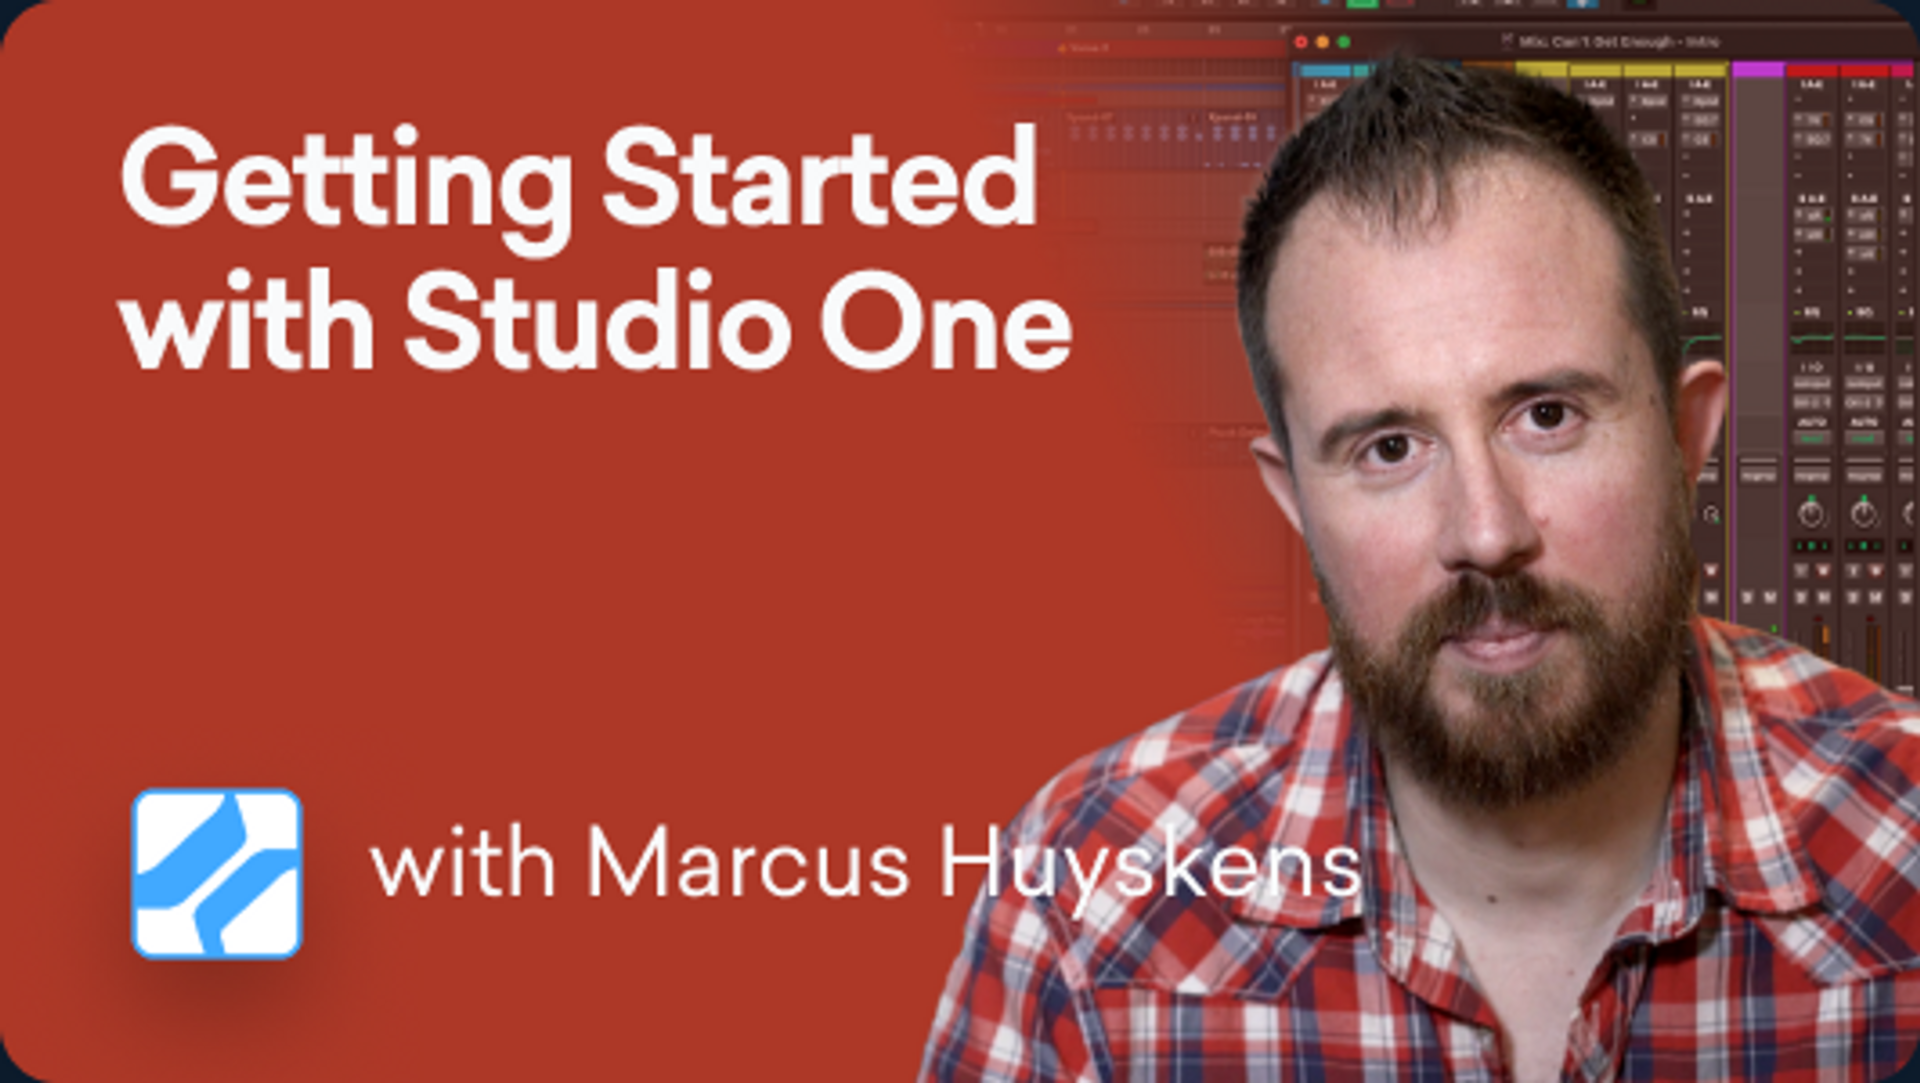 Getting started with Studio One